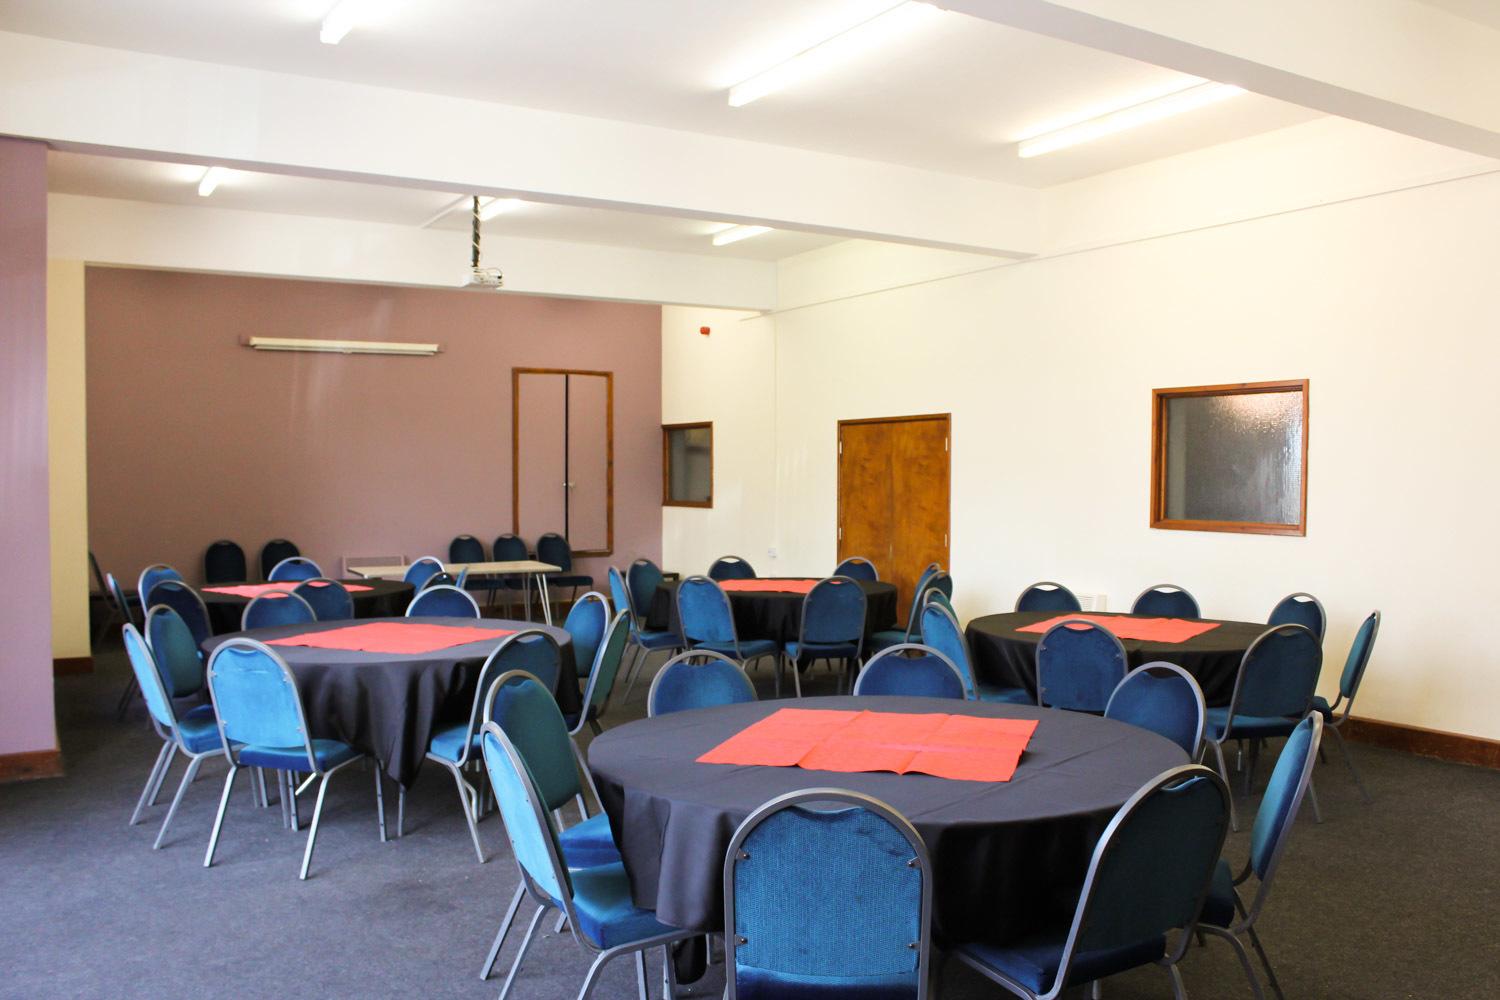 Gallery, Arena Church Conferencing Centre photo #1